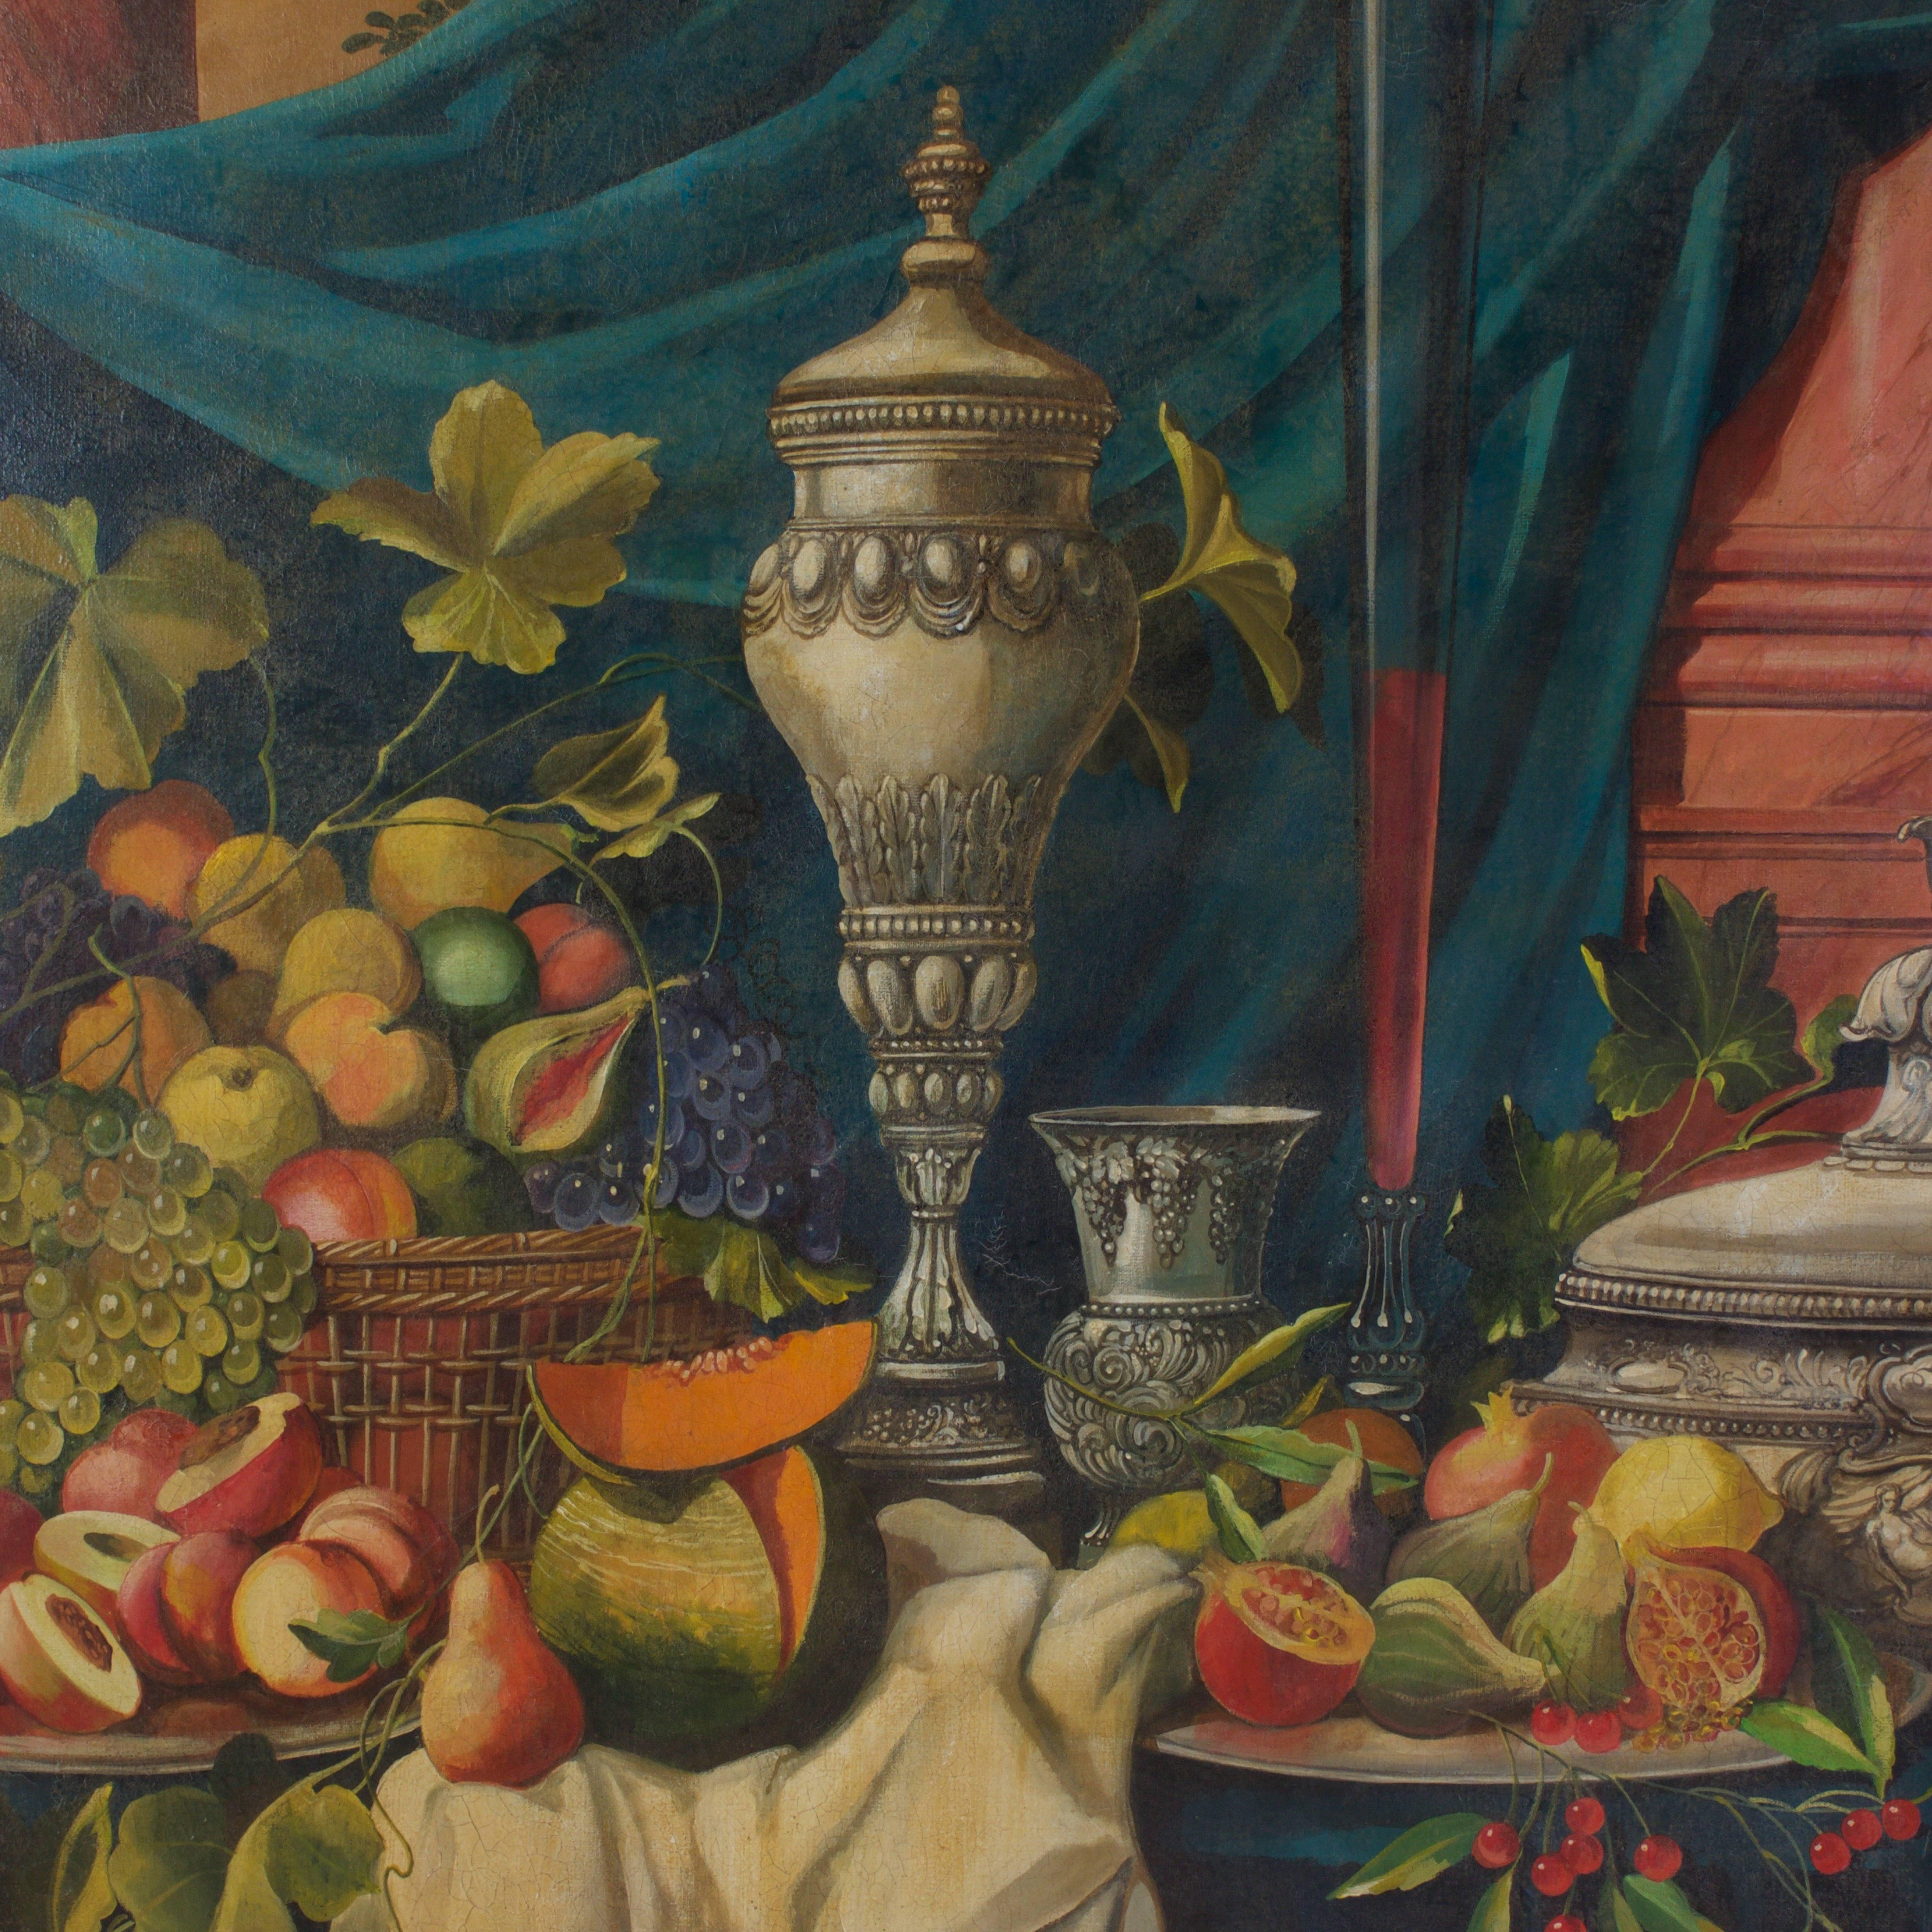 Still Life Oil on Canvas Painting by William Skilling  1